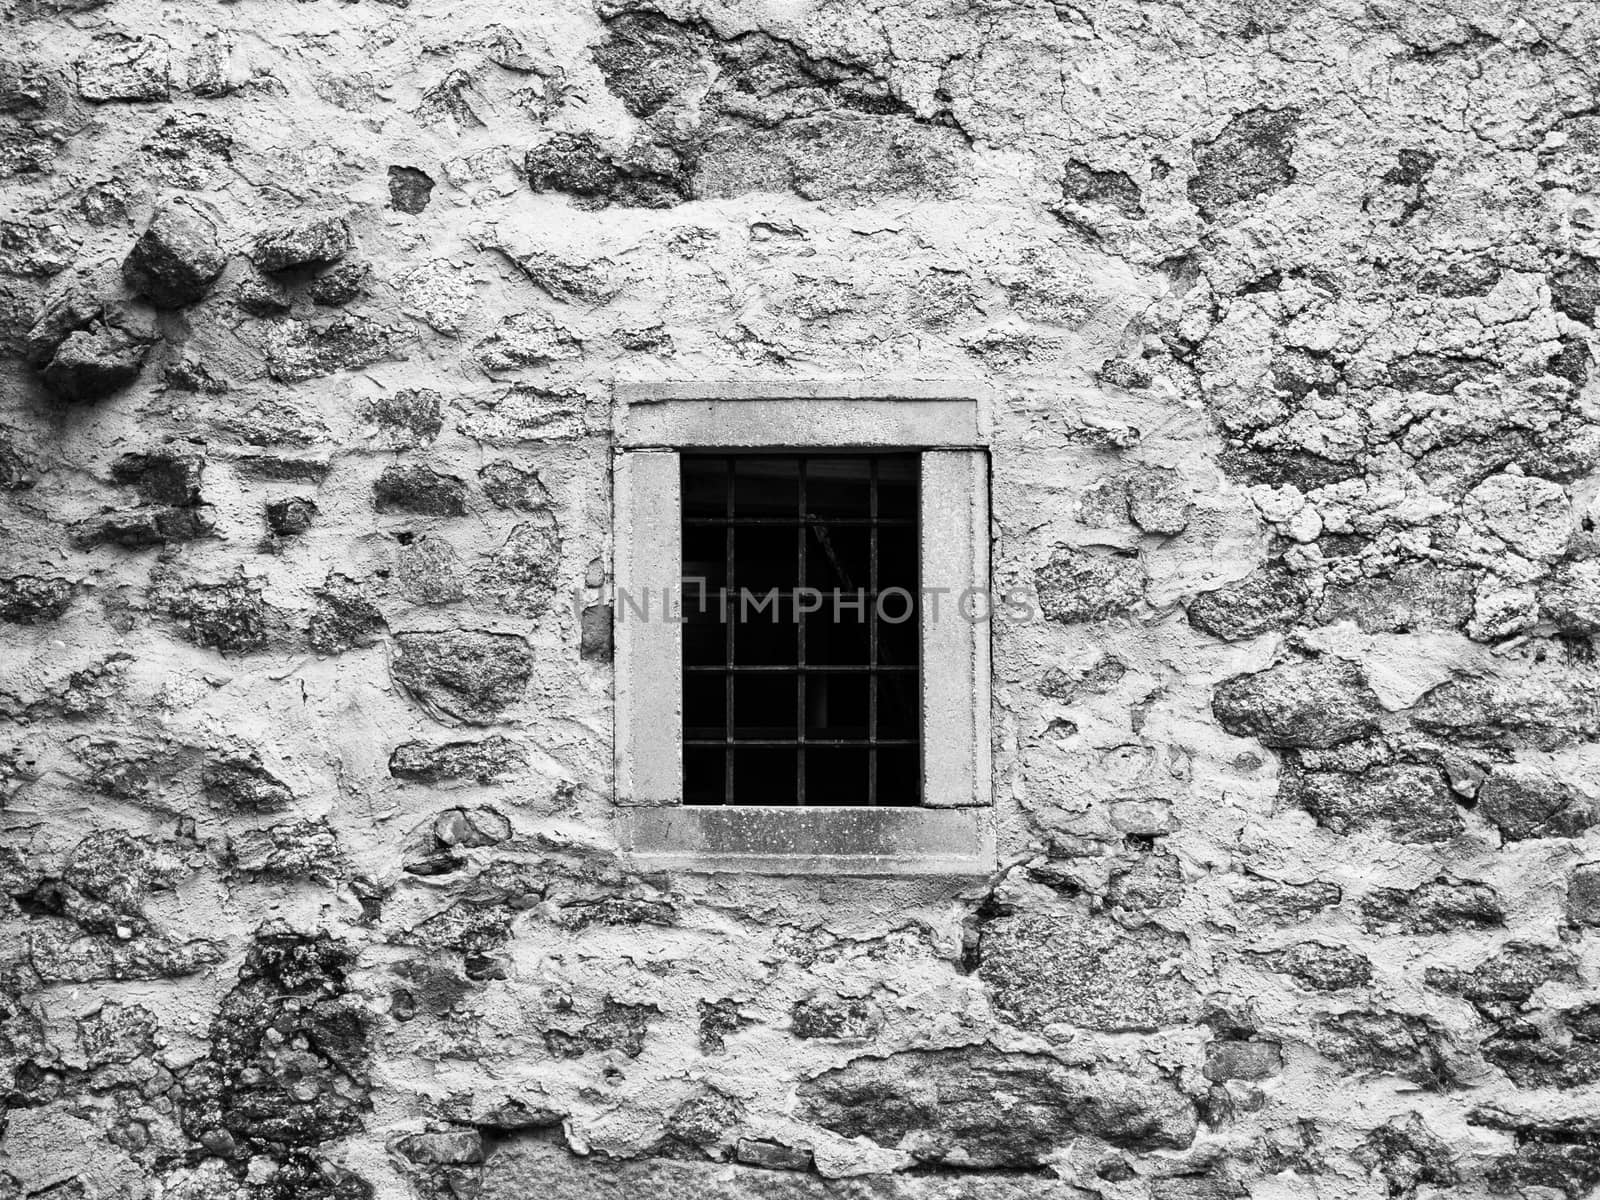 Old prison jail window with rusty metal bars. Vintage style image. Black and white image.